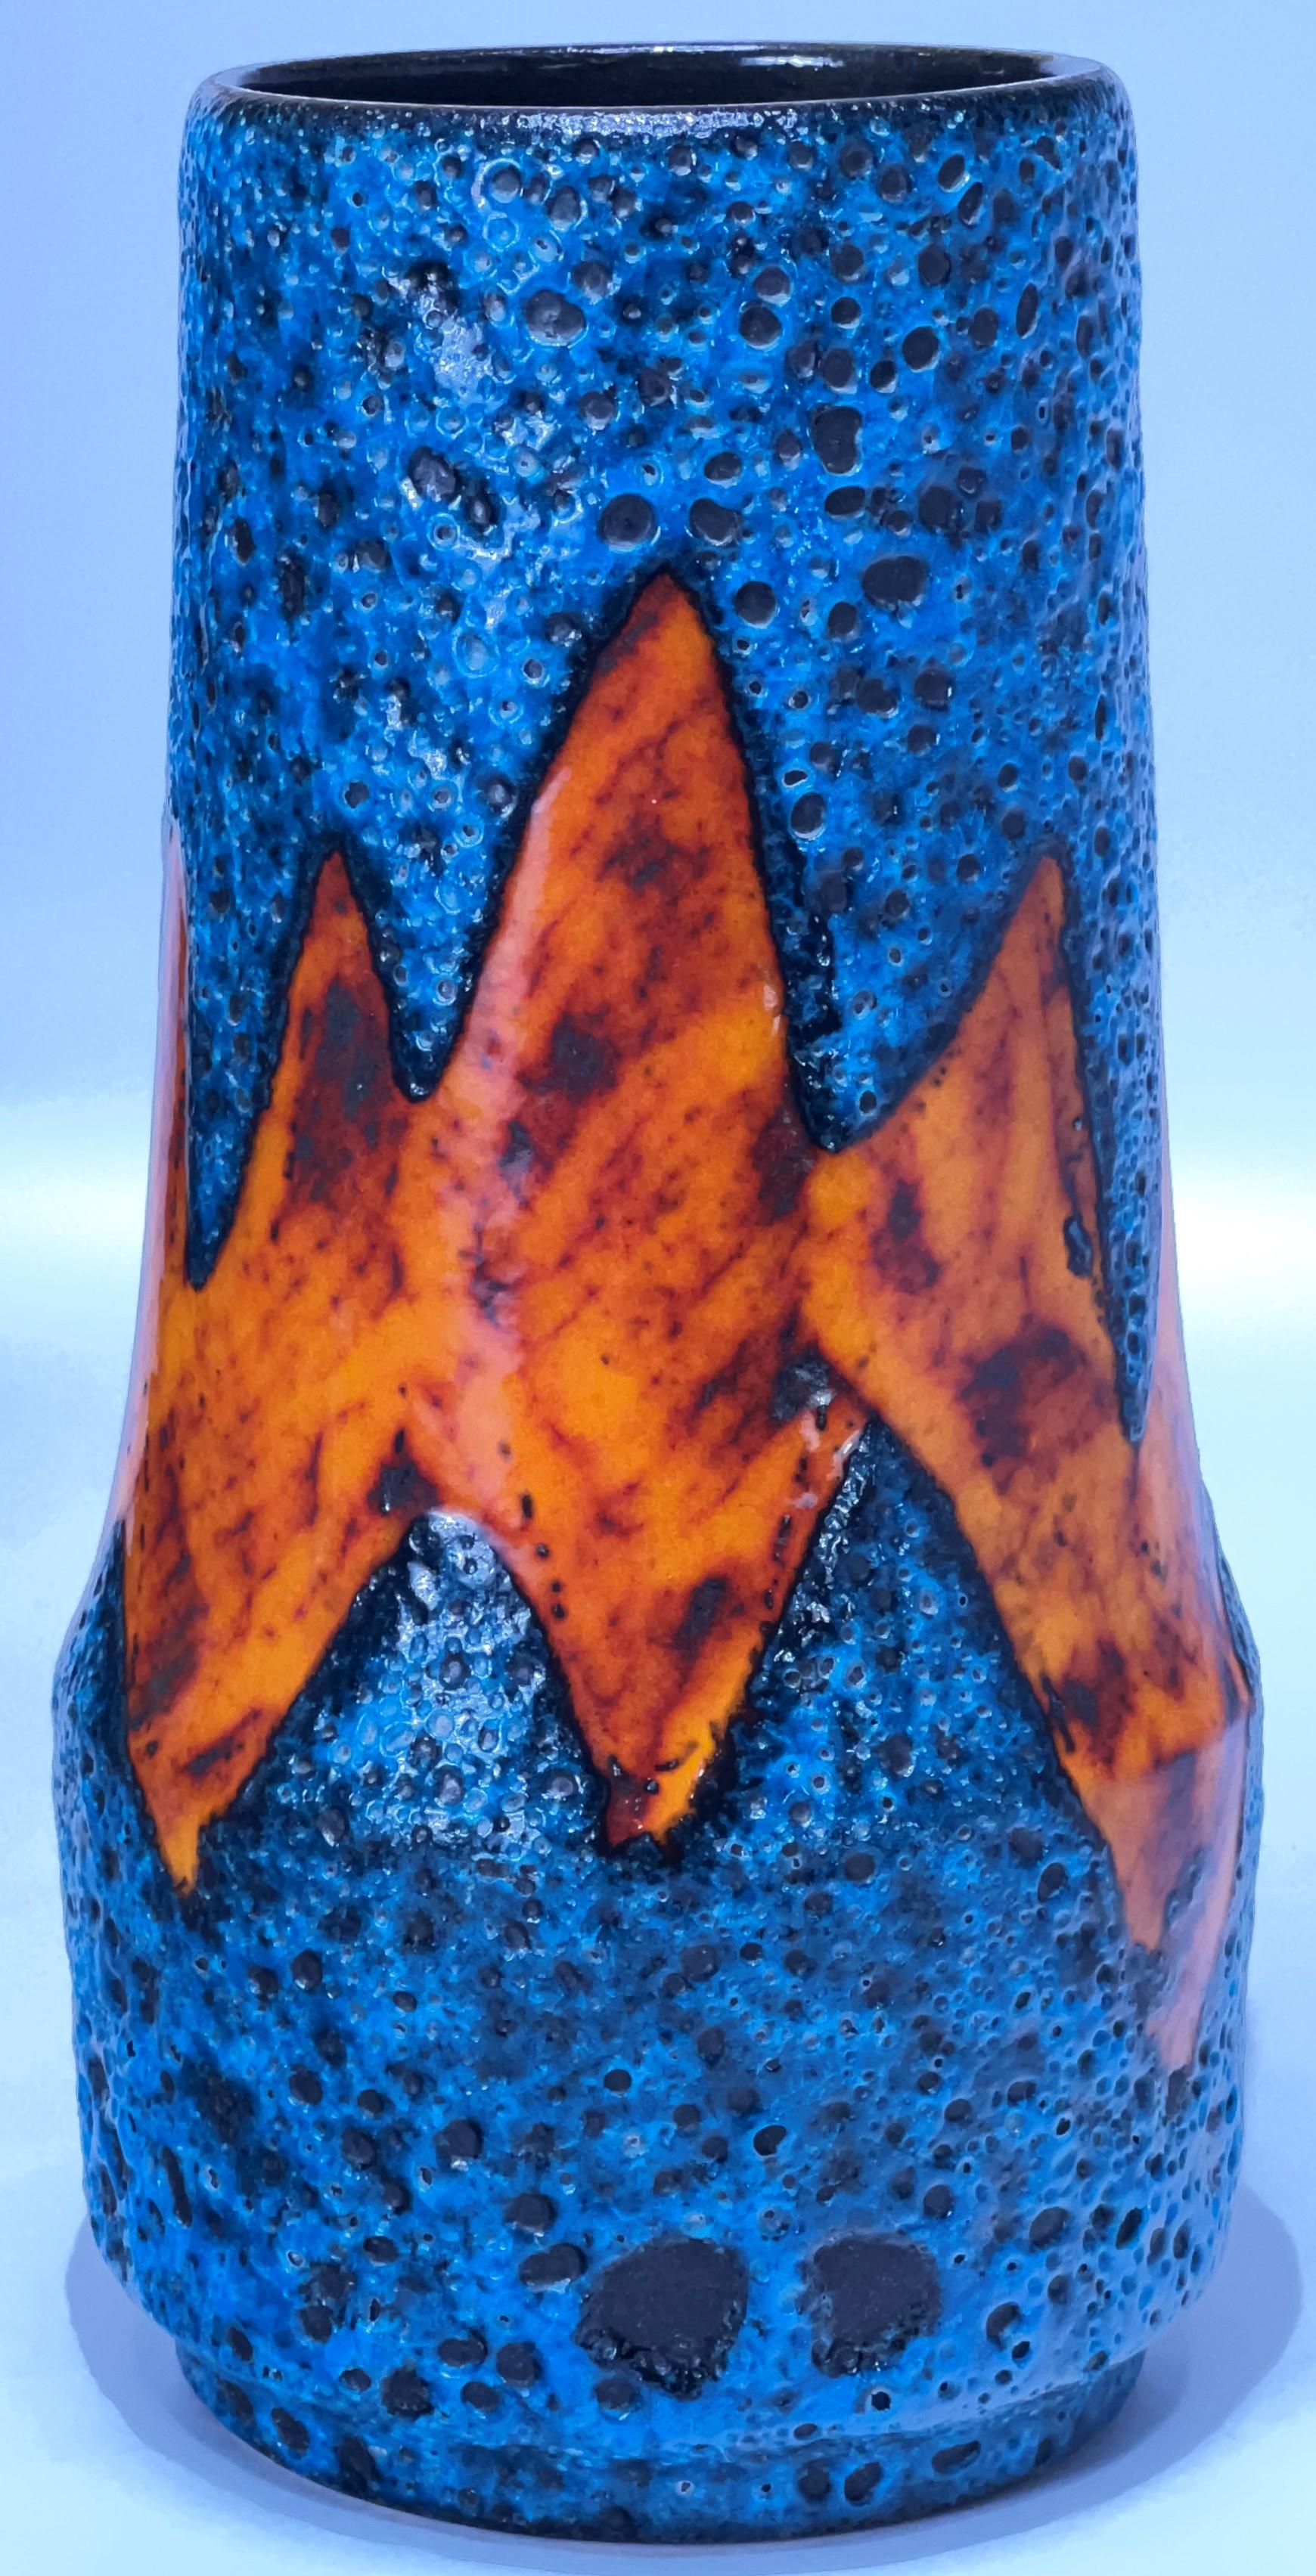 Simply gorgeous peacock blue volcanic orange red lava with a wide flaming zig zag Lightning decor that reminds me of the Lora decor. Although, it also resembles the peaks and troughs of the stock market. In fact, this would make a perfect gift for a